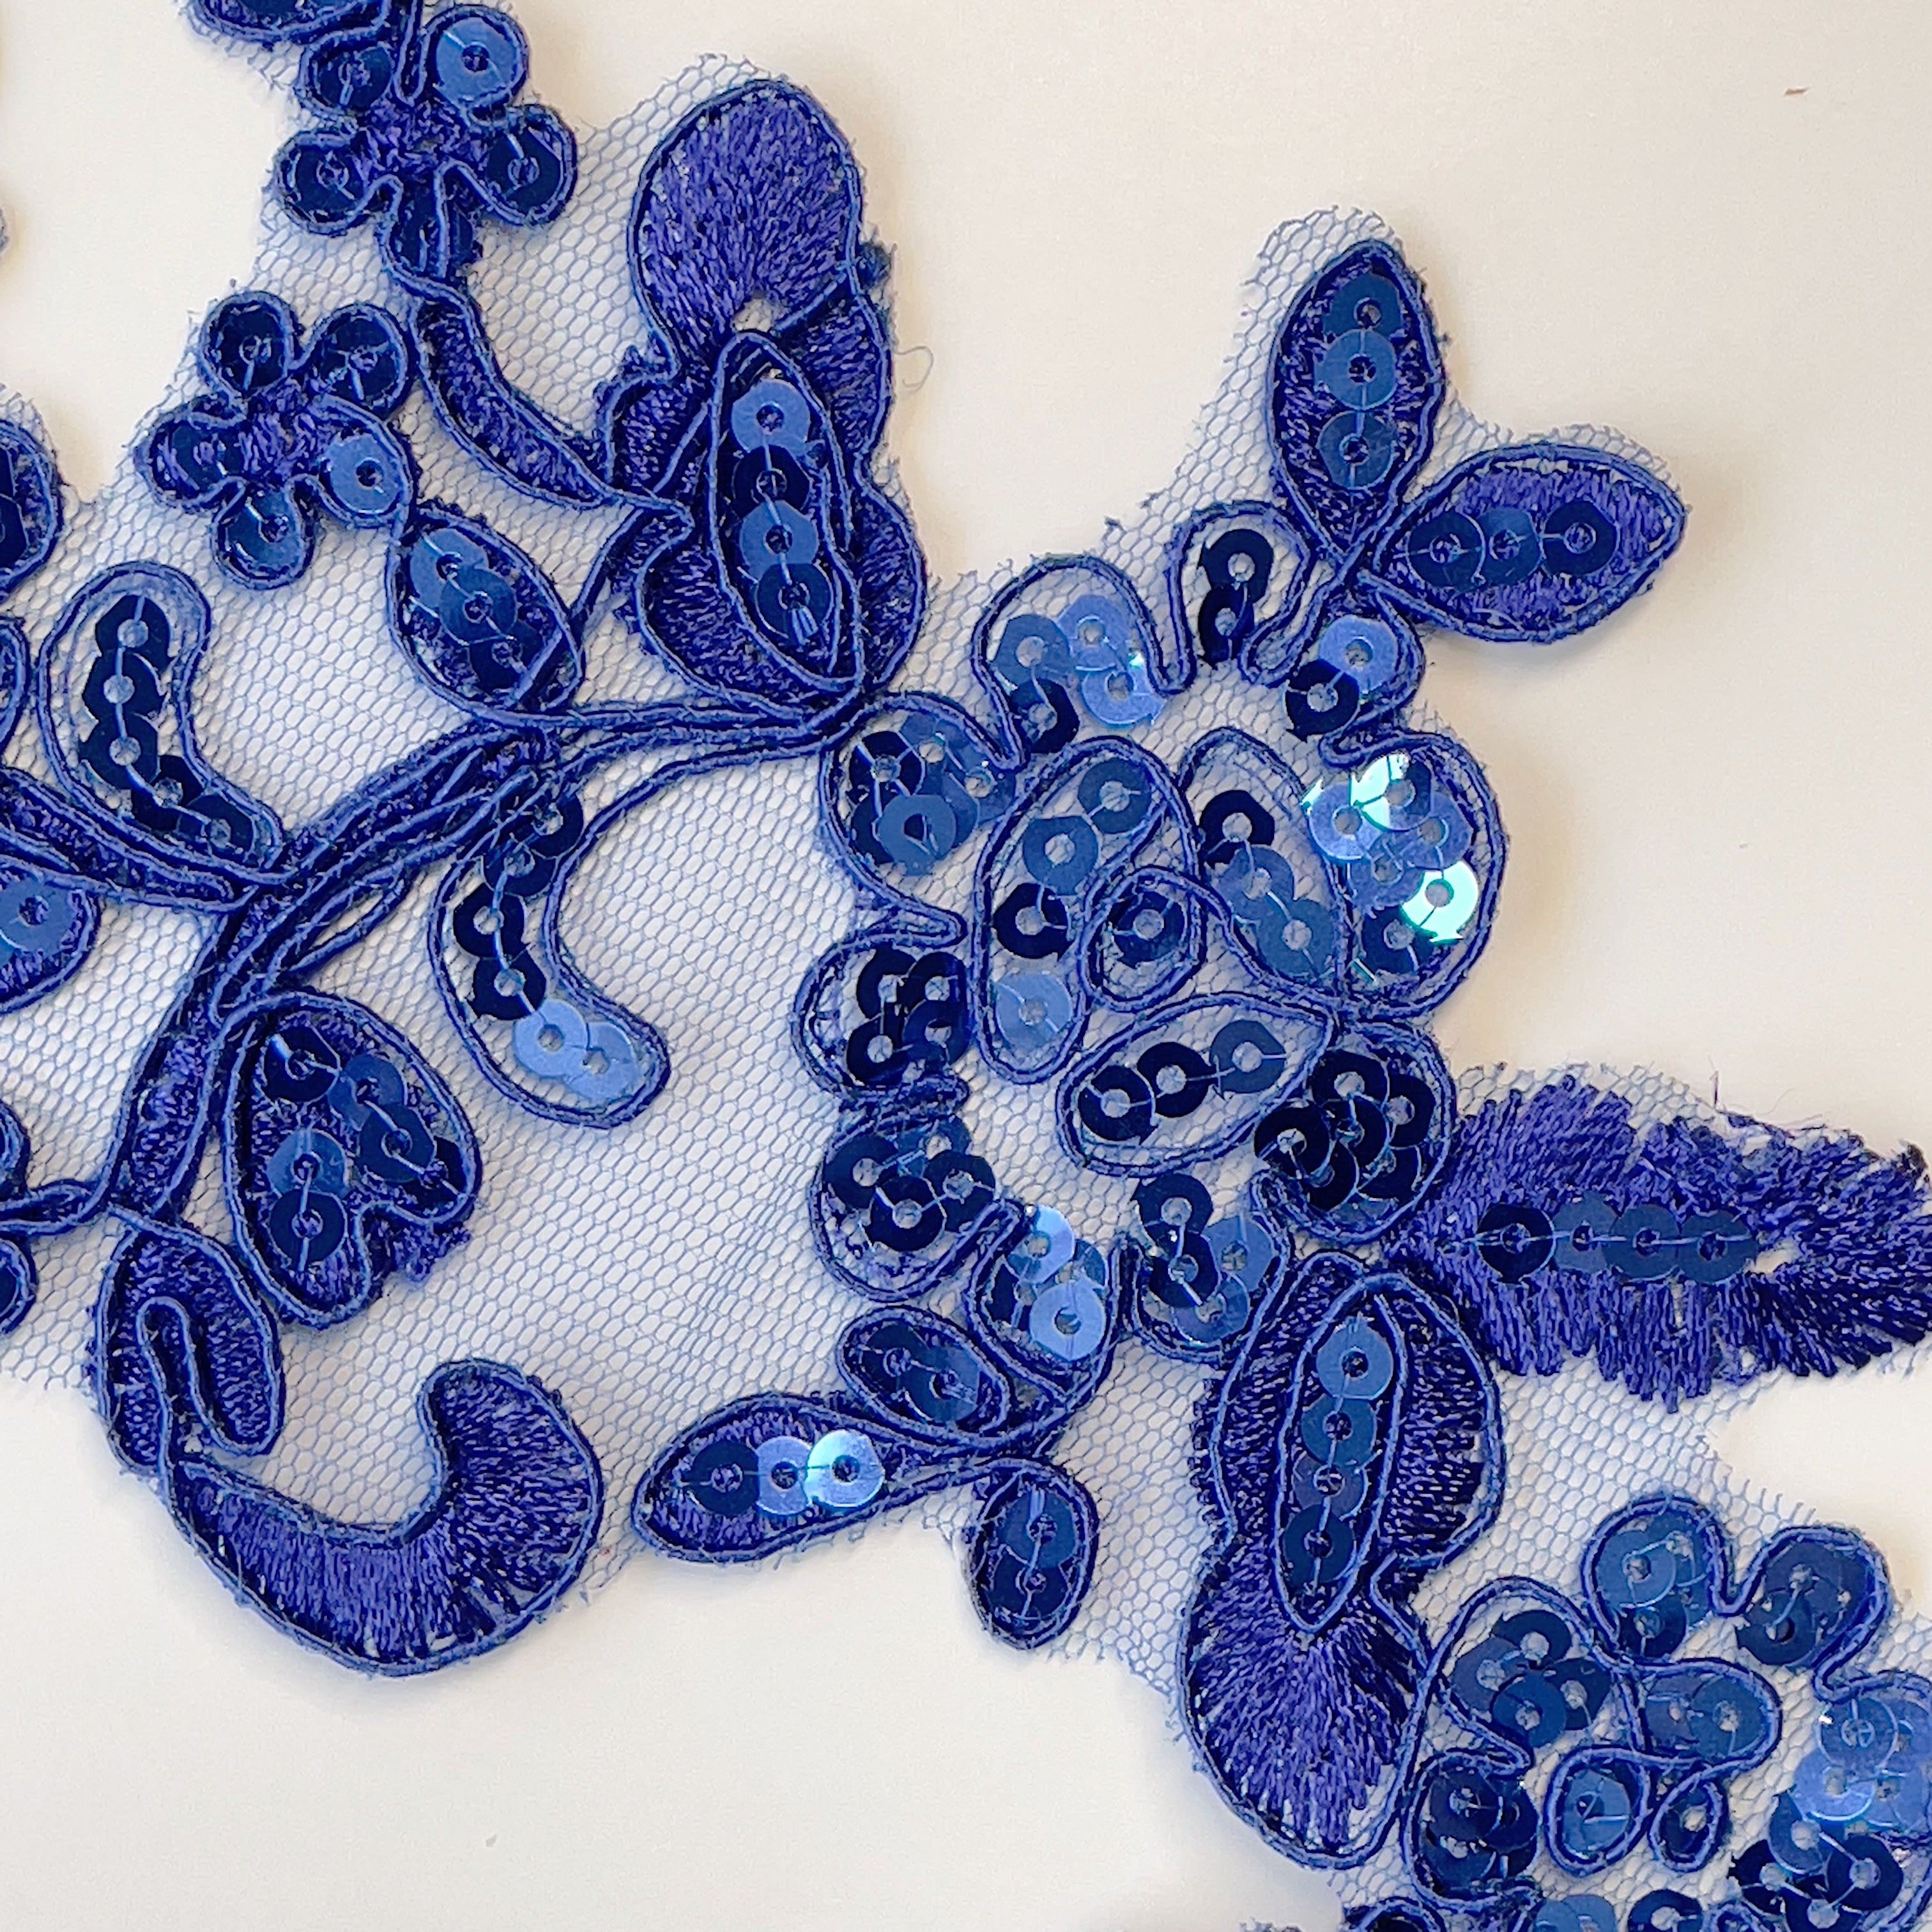 Heavily sequinned royal blue embroidered and corded floral lace applique pair.